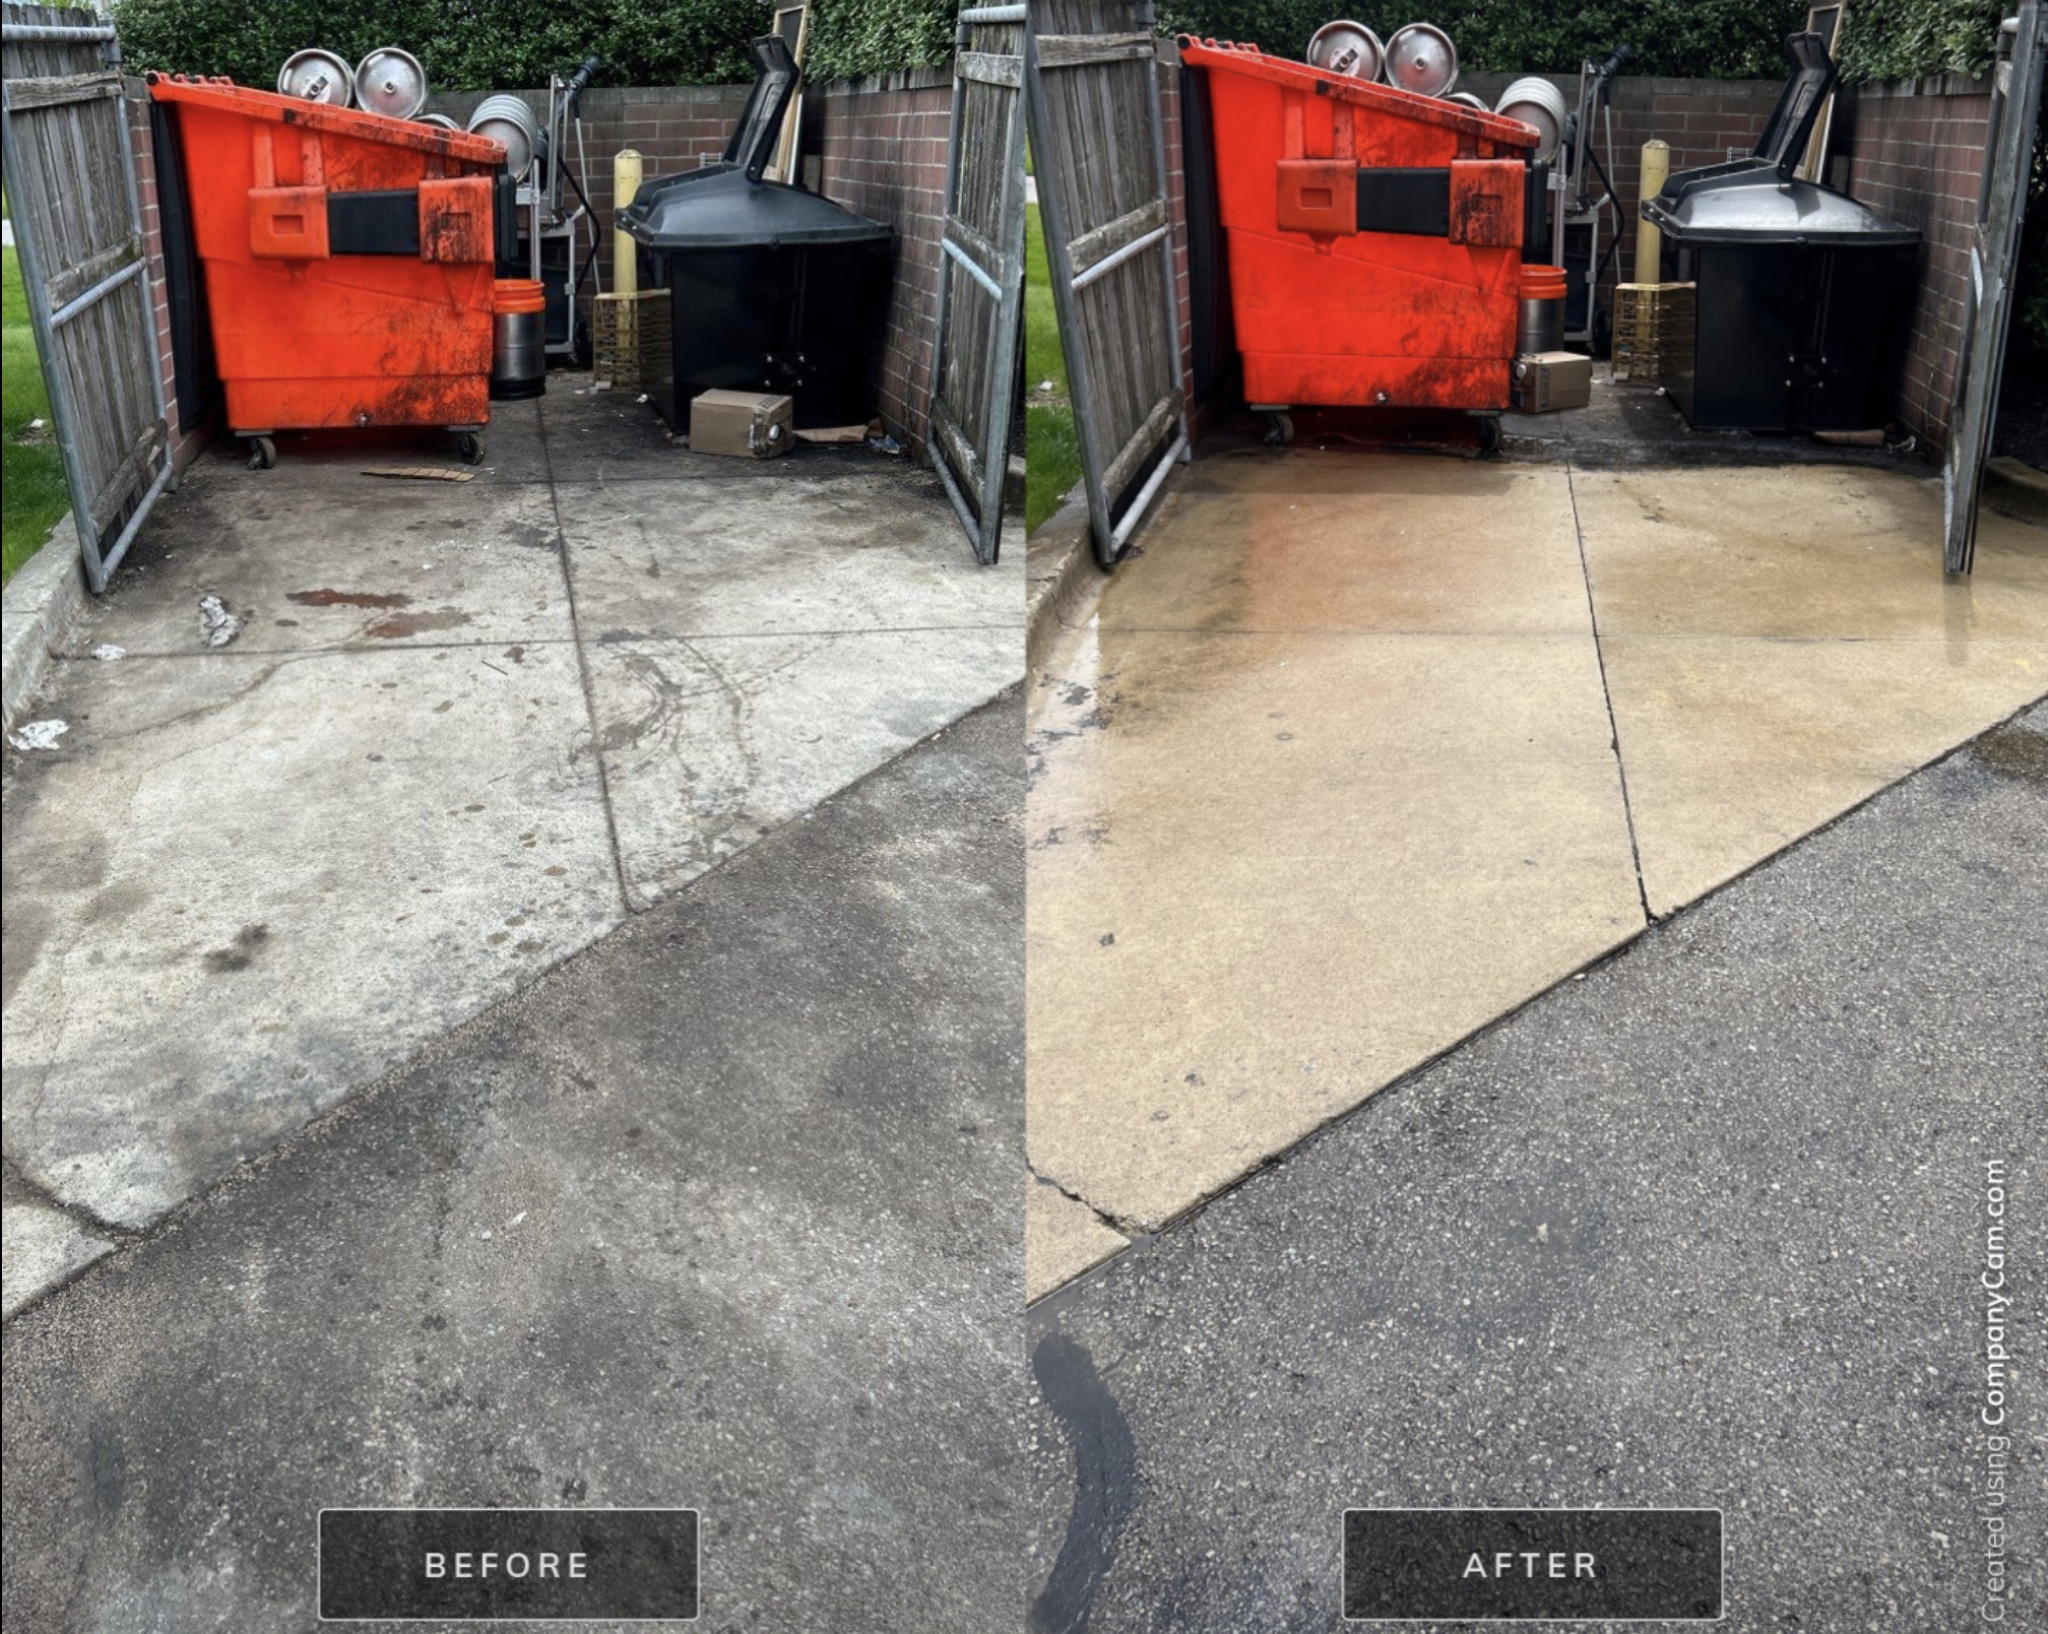 Dumpster Pad Cleanup Services Indianopolis, IN